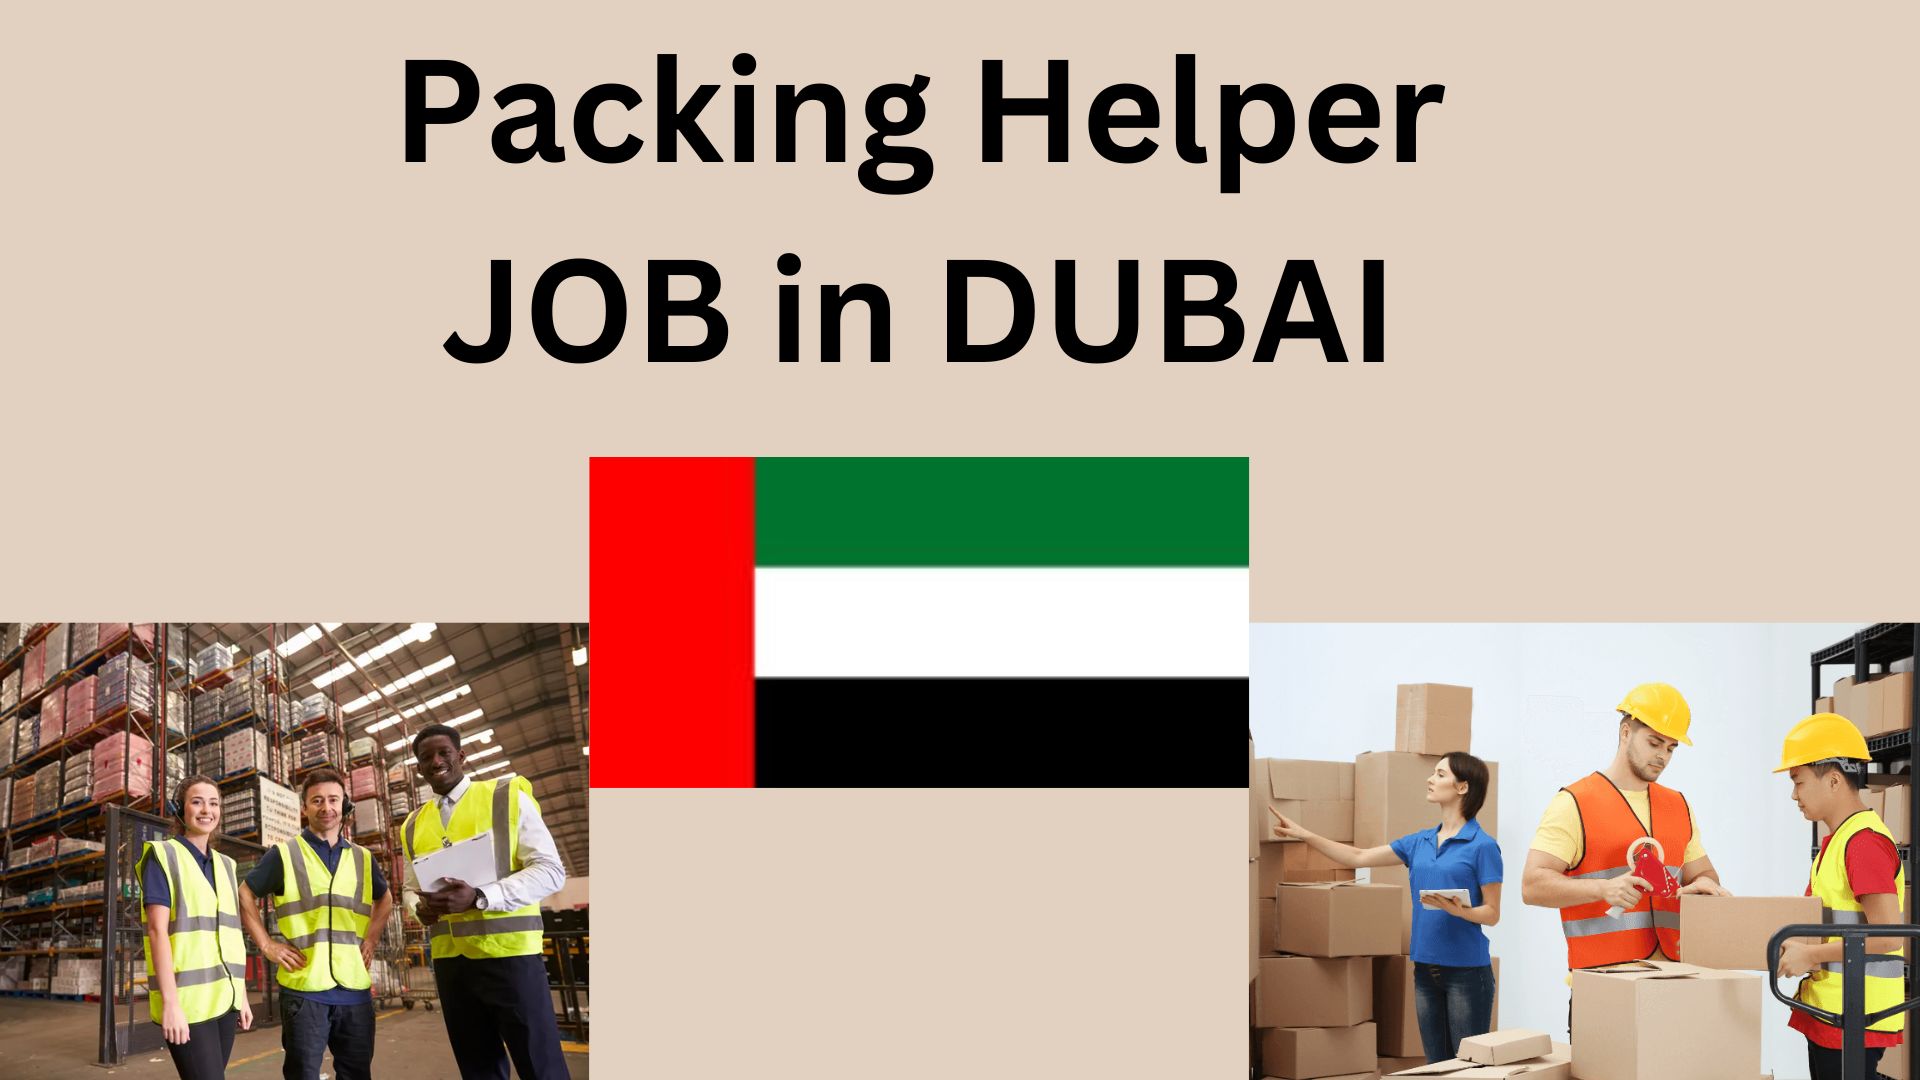 Lucrative Packing Helper Jobs in Dubai for Career Enthusiasts